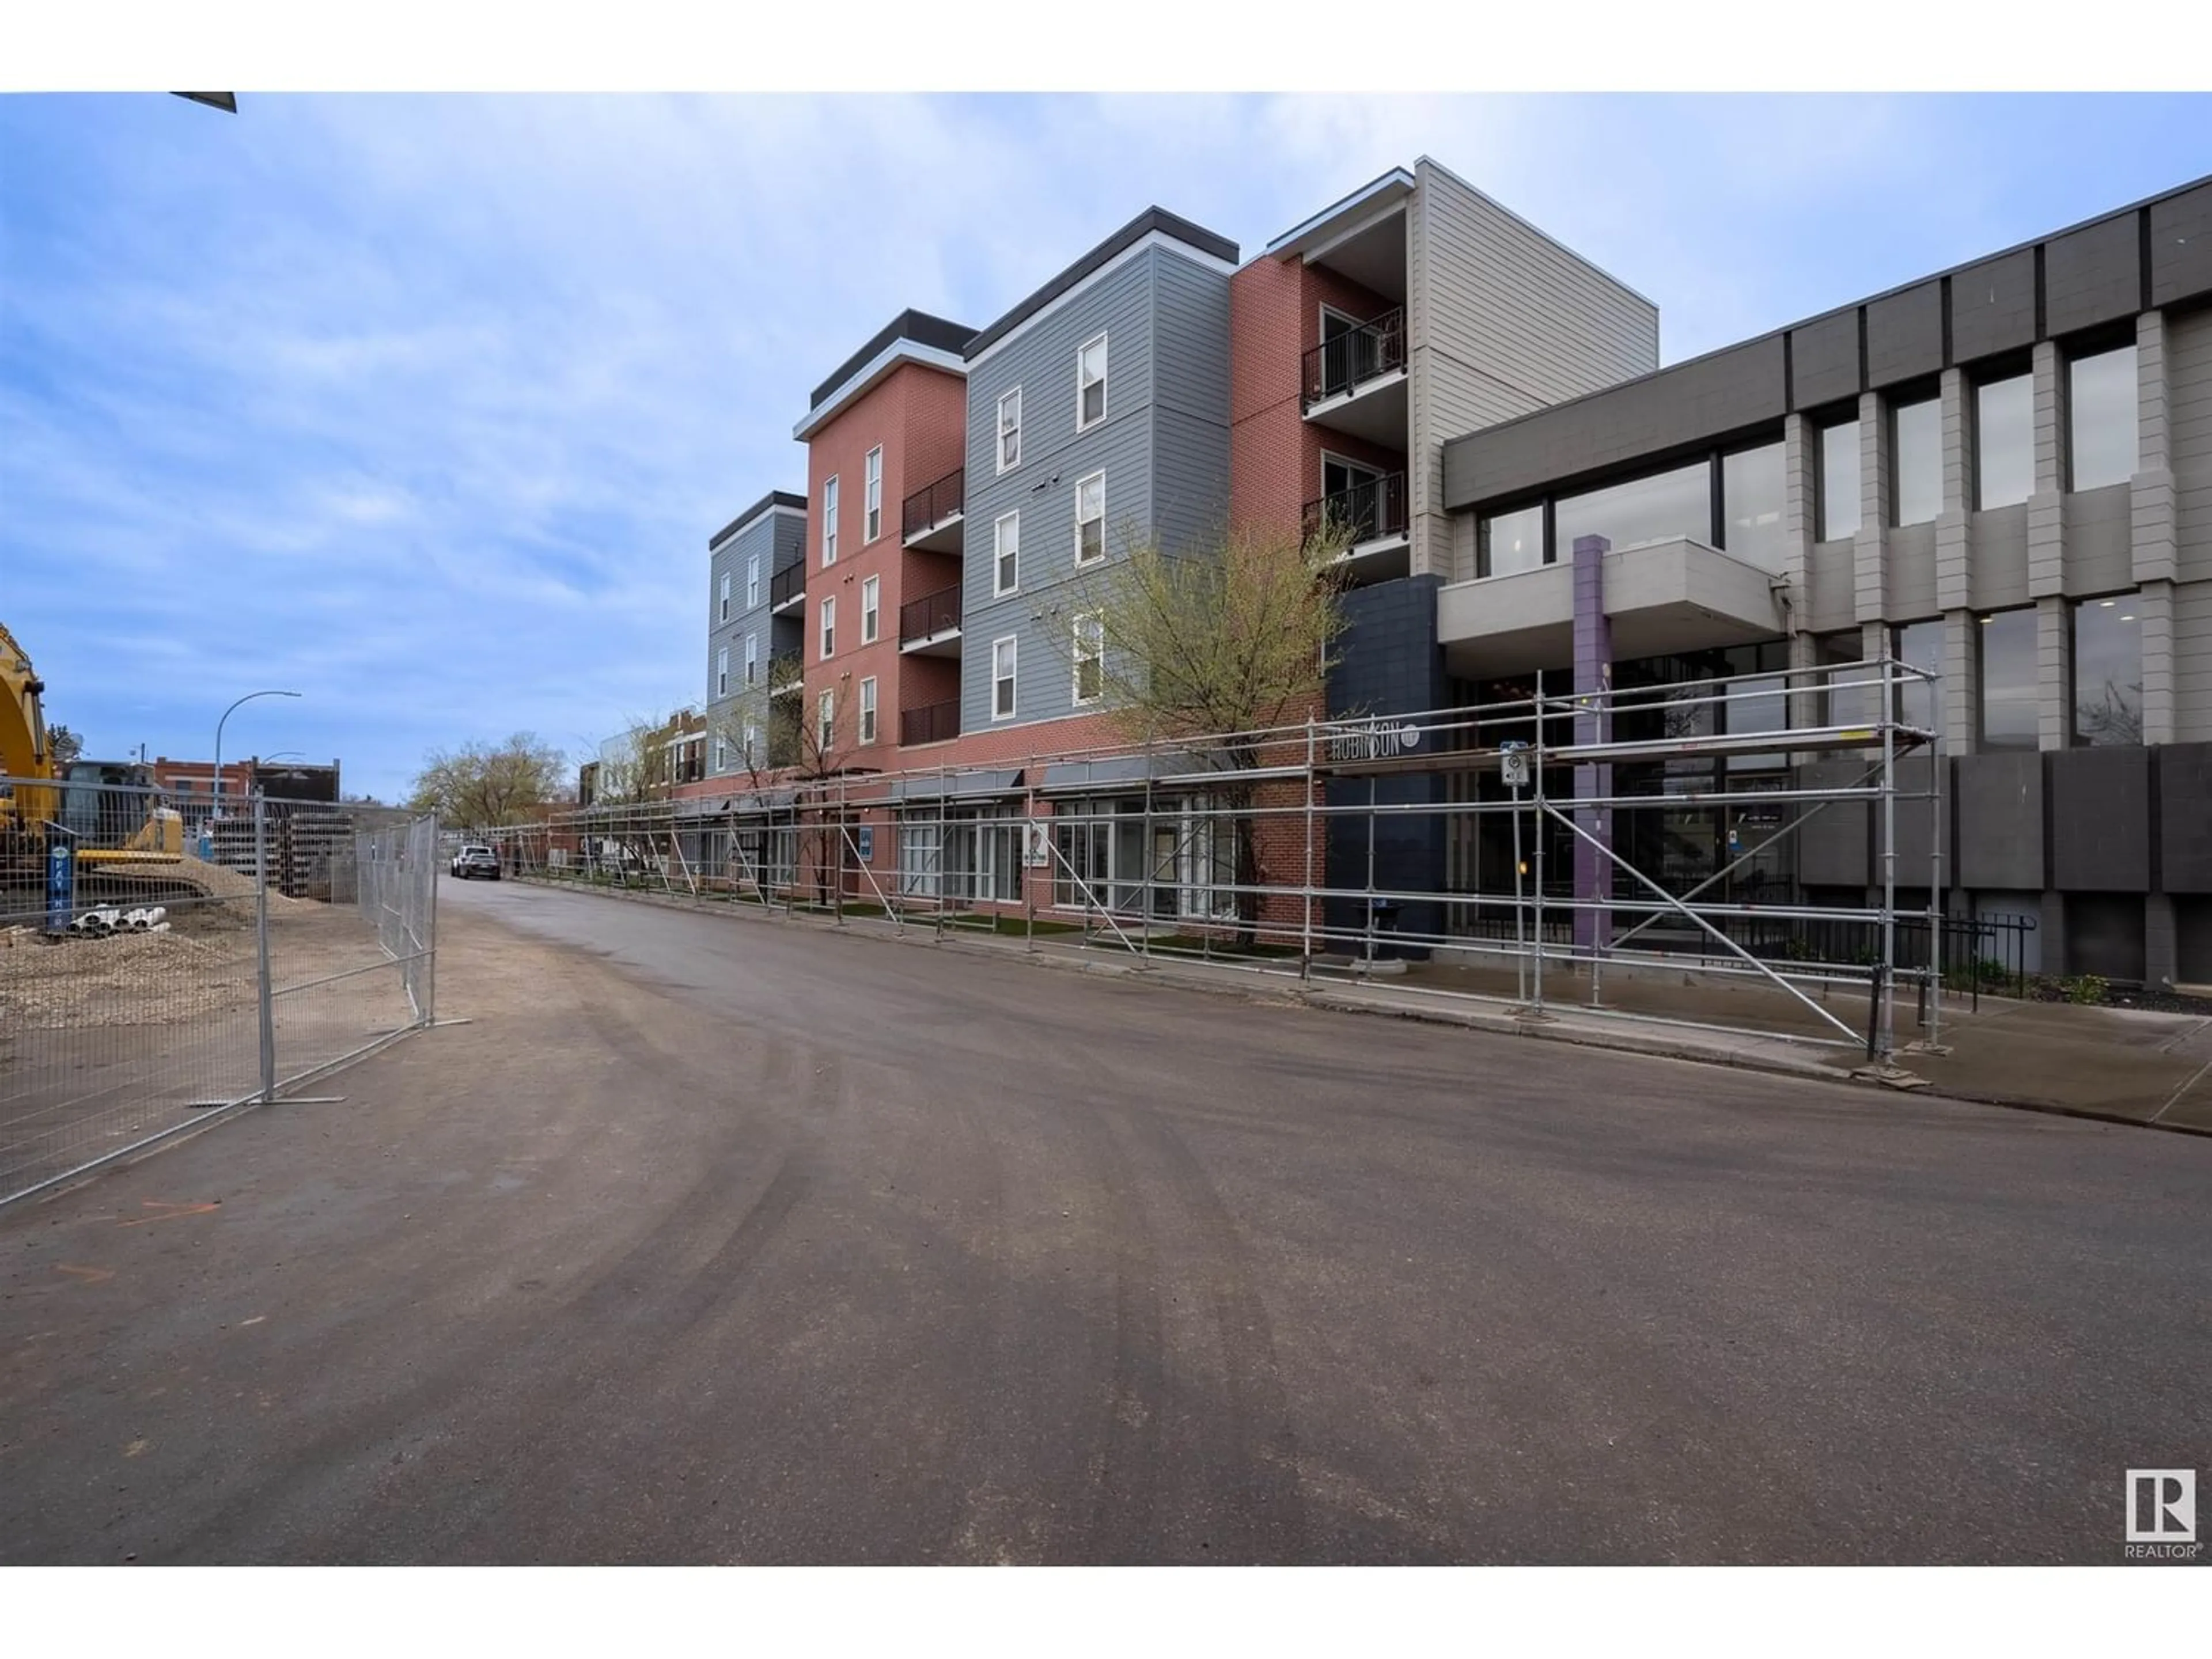 A pic from exterior of the house or condo for #209 10418 81 ave NW, Edmonton Alberta T6E1X5